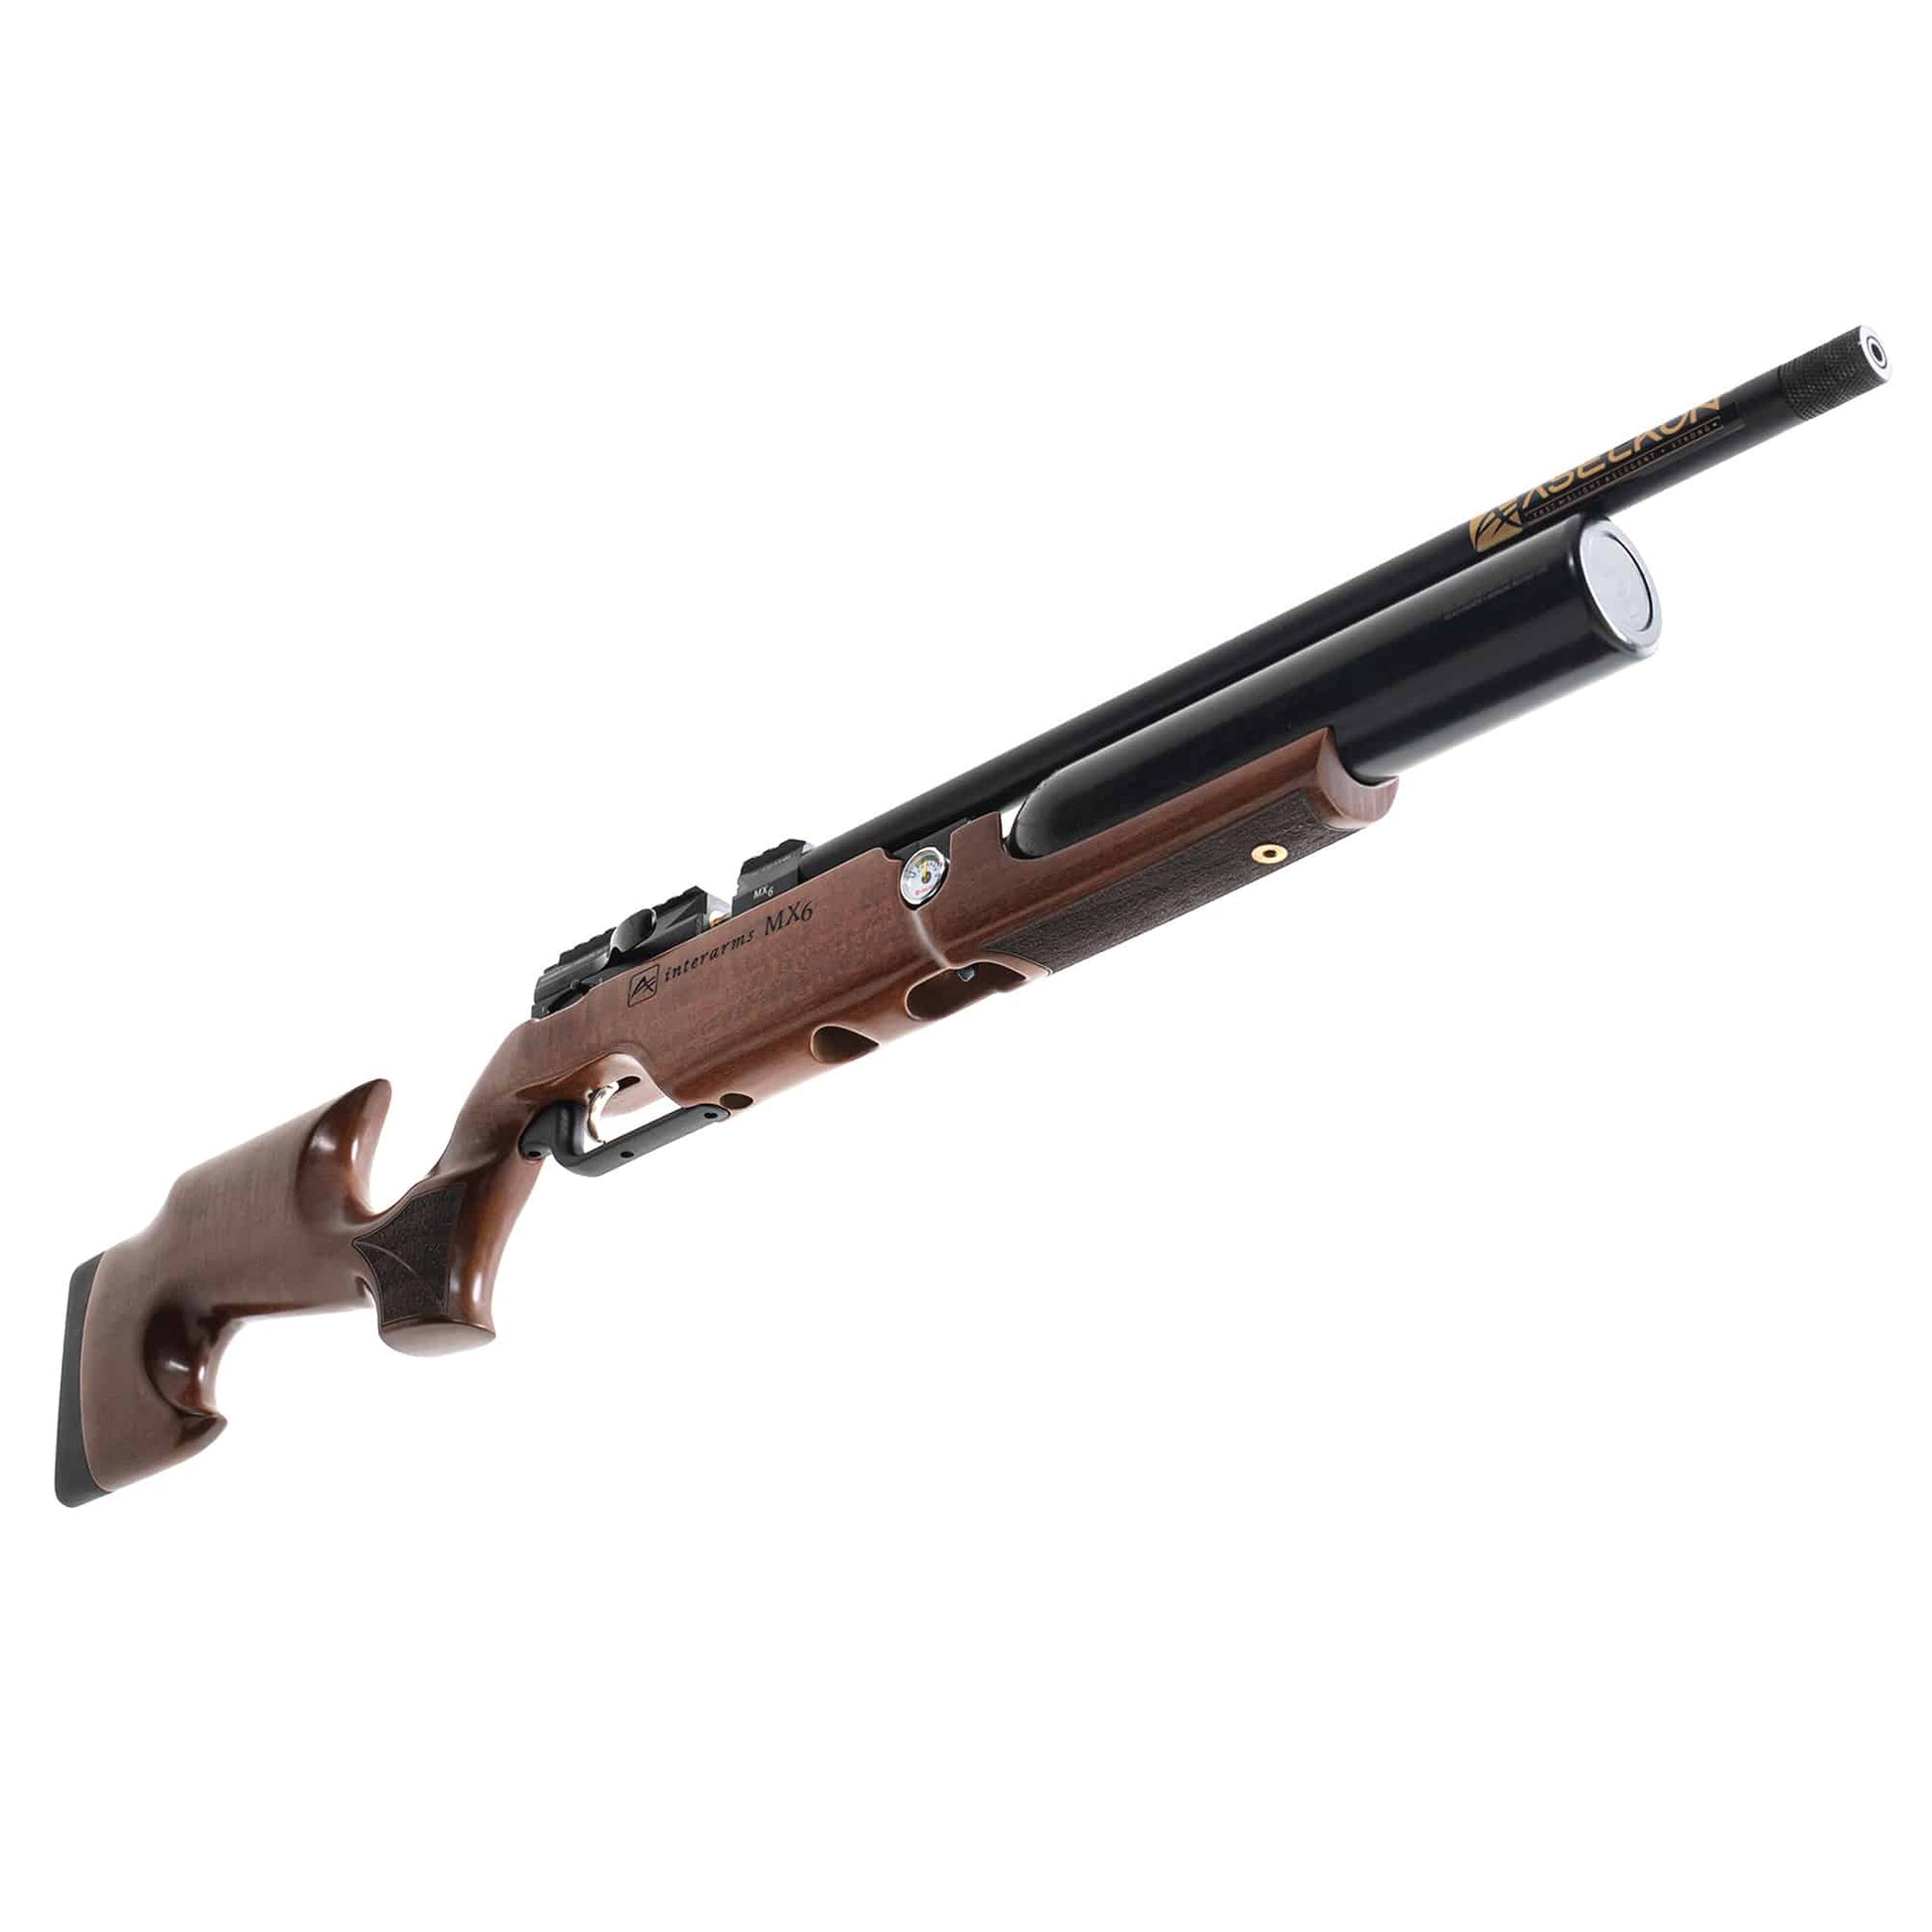 Right angle view of a brown Aselkon MX6 .22 Caliber Air rifle